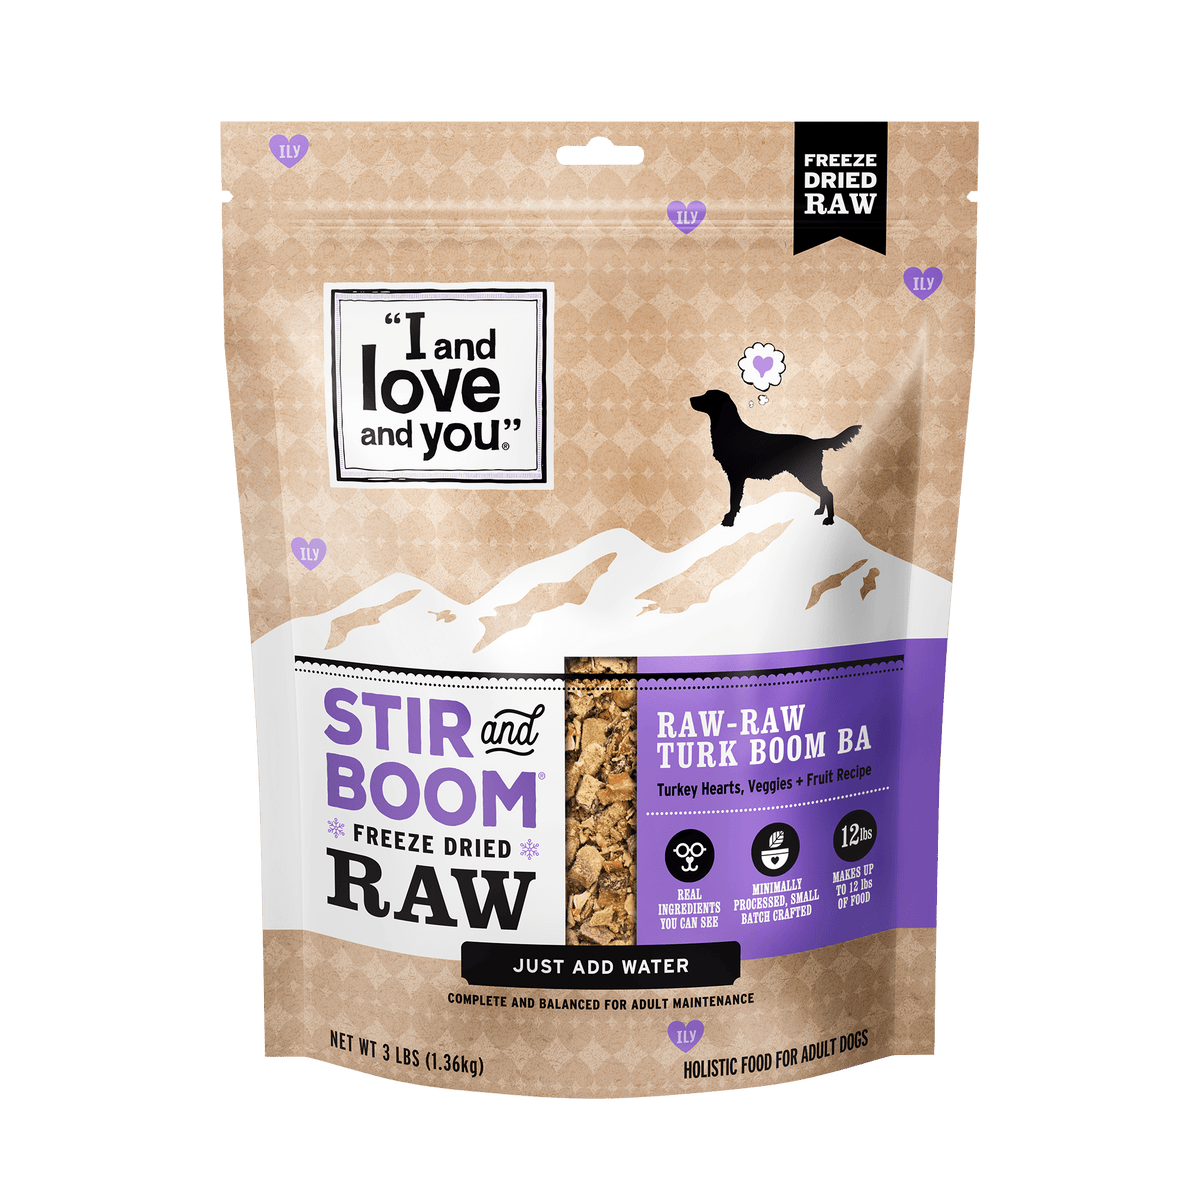 Stir & Boom - Raw Raw Turk Boom Ba: A bag of dehydrated dog food with visible turkey hearts, carrots, cranberries, broccoli, and sweet potato.